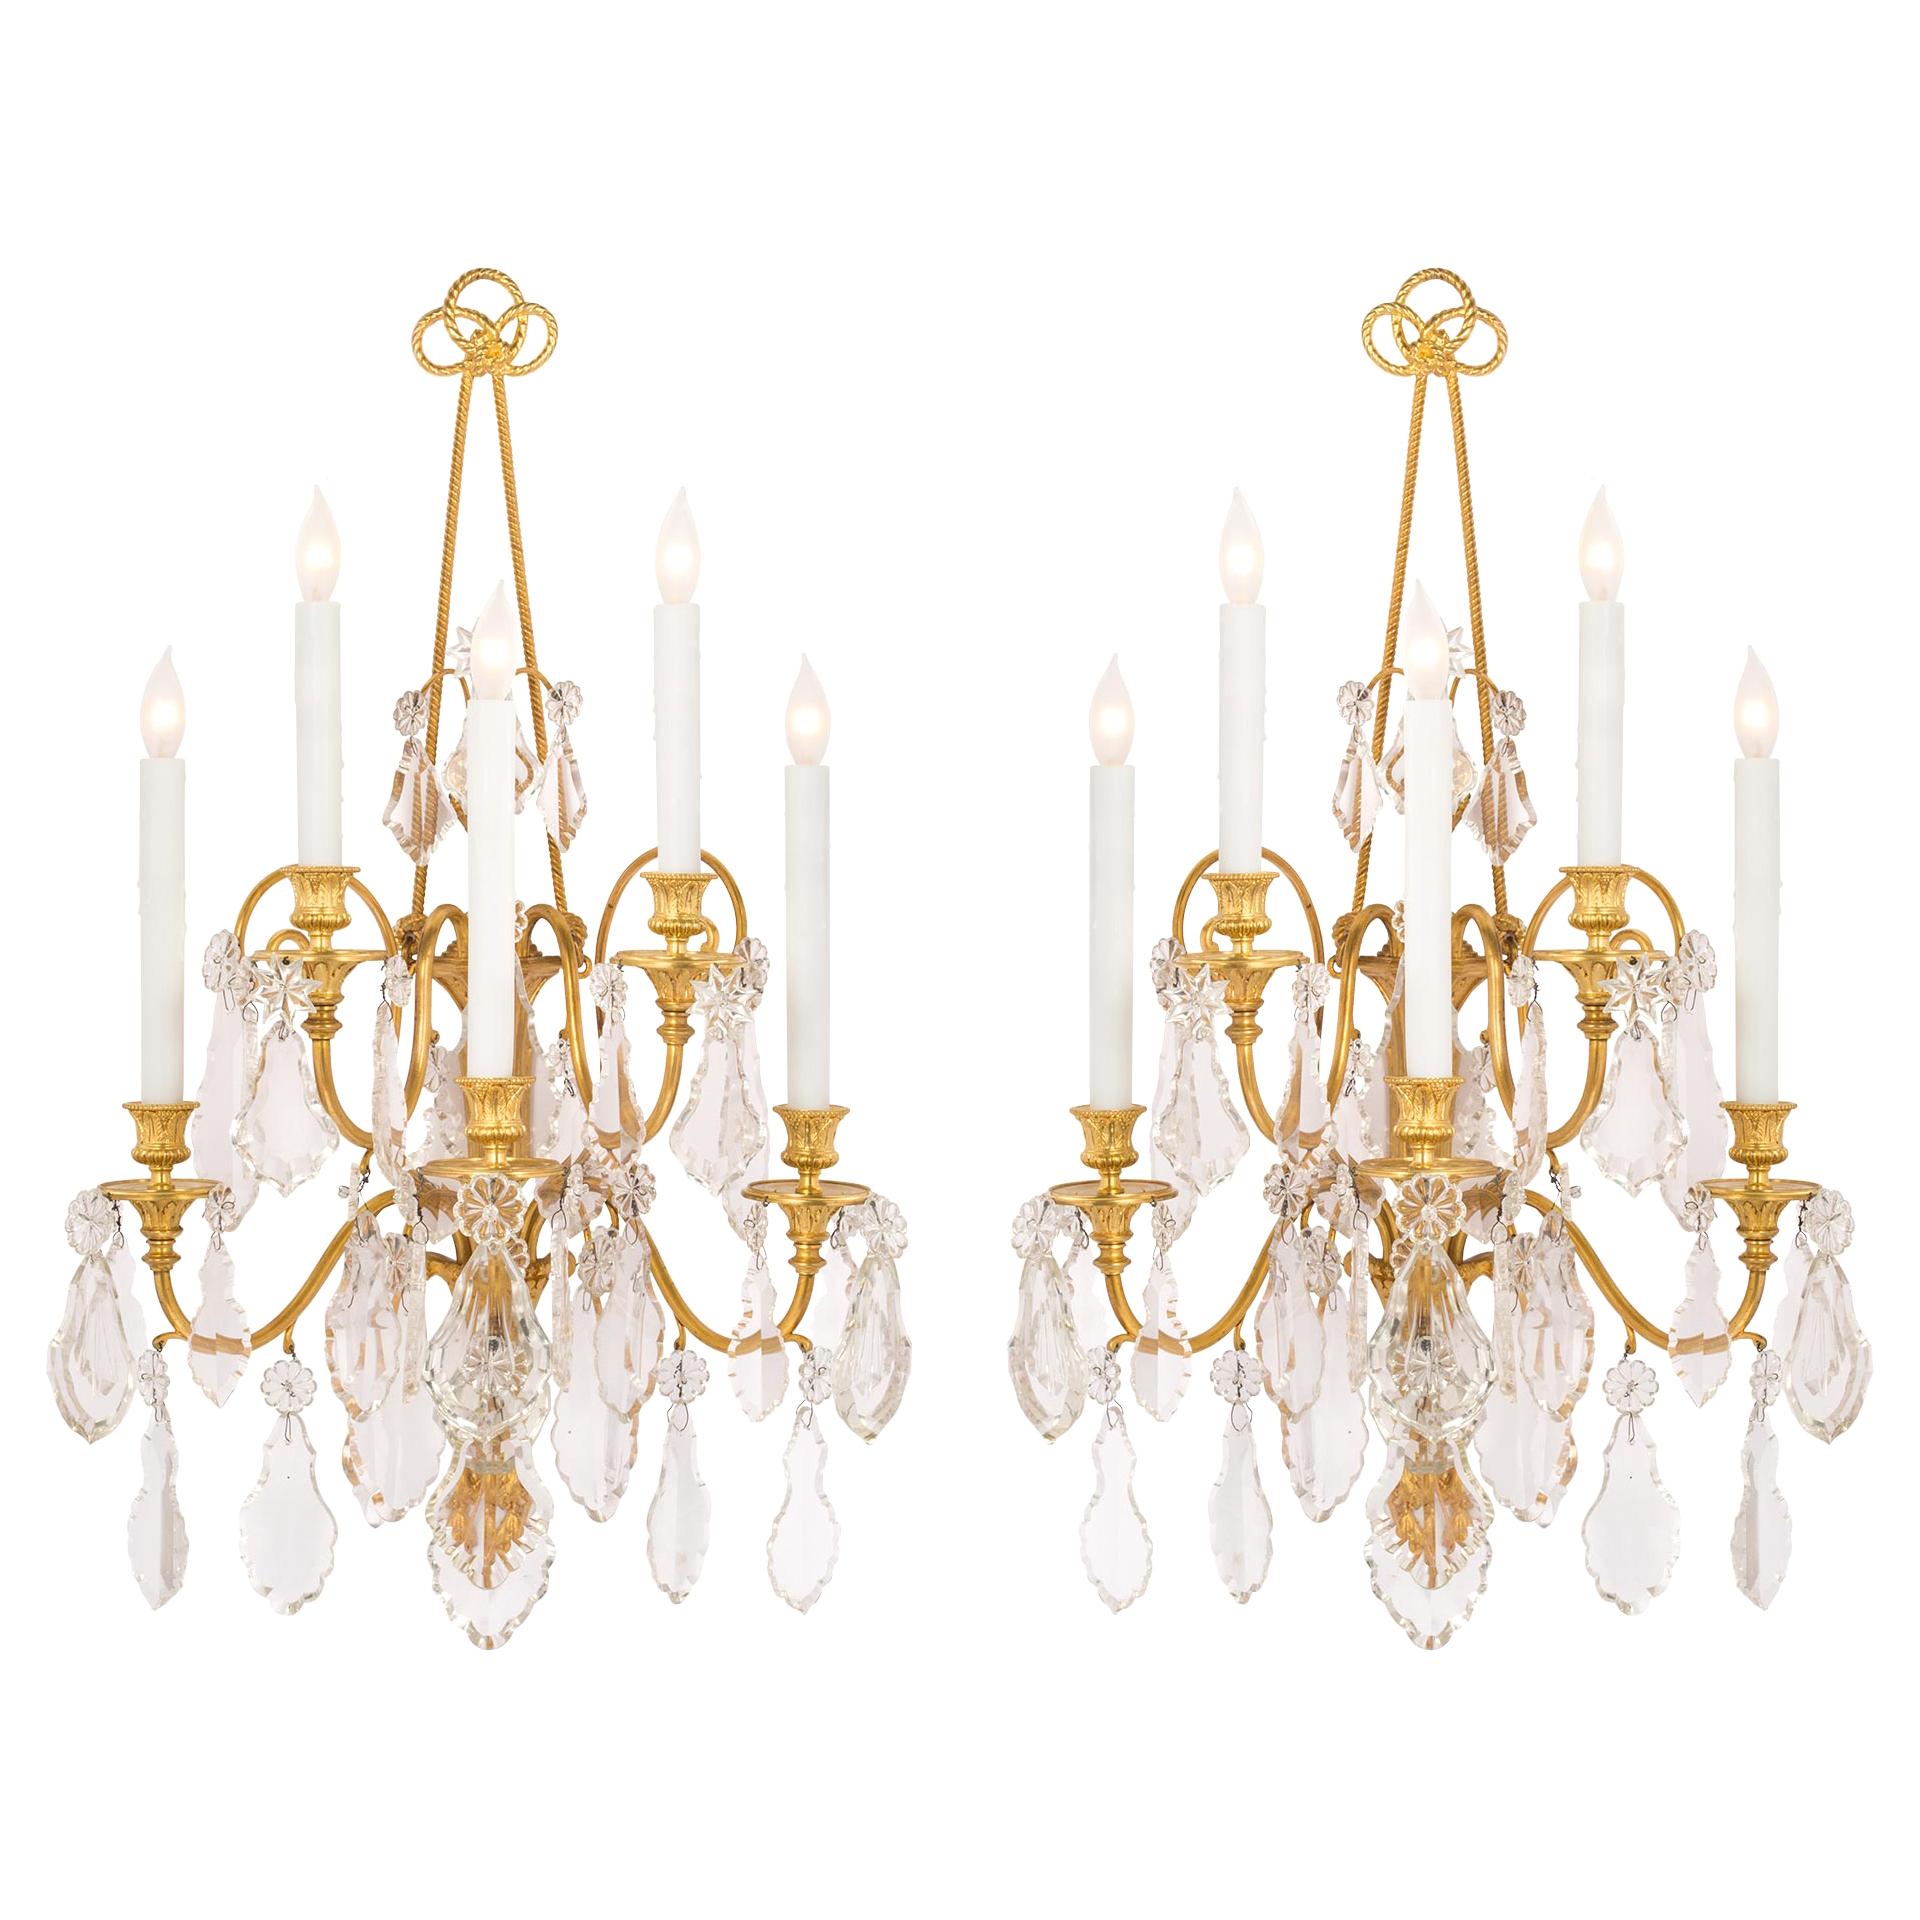 Pair of French 19th Century Louis XVI Style Five-Arm Sconces For Sale